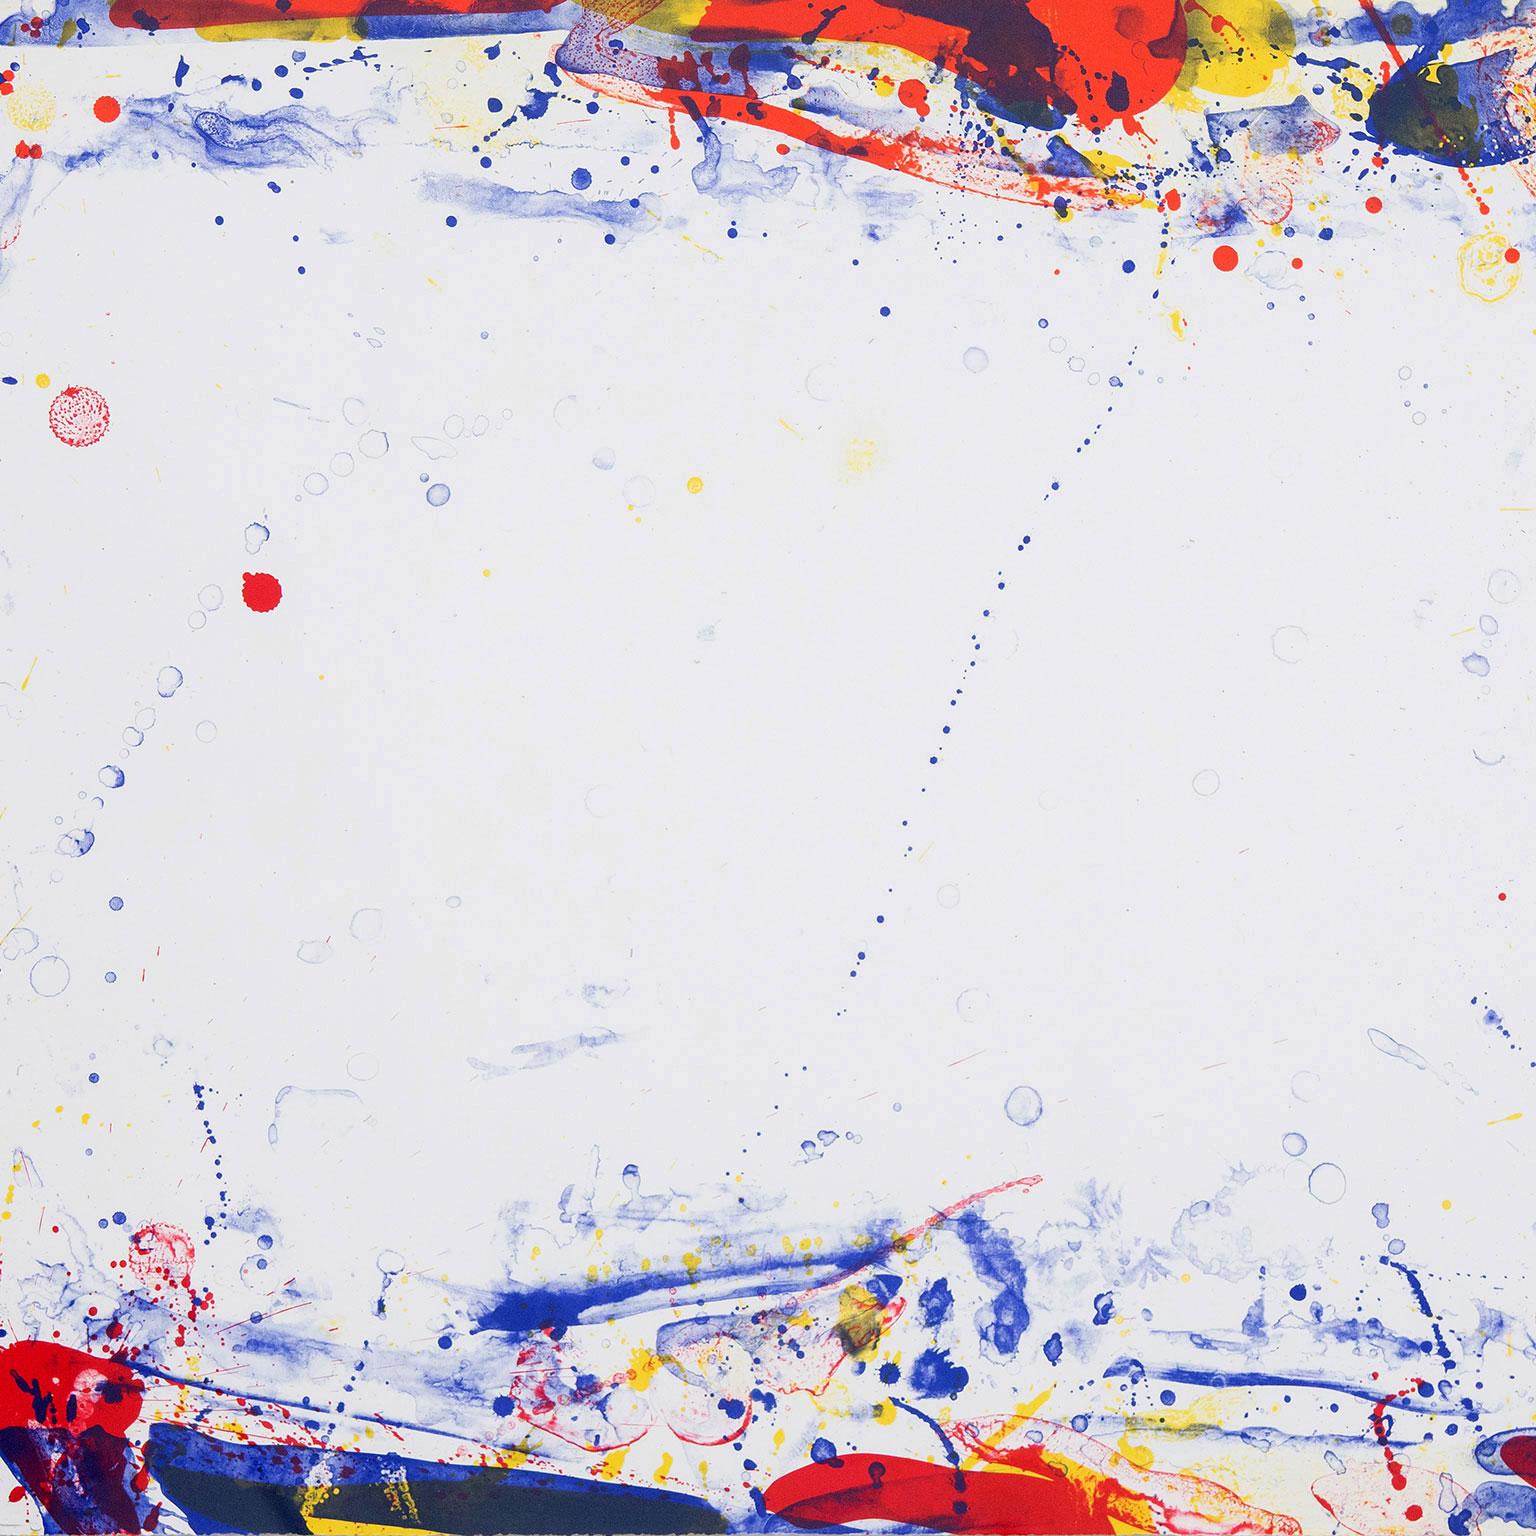 Damp, Lithograph, USA 1969, Signed and numbered by artist - Abstract Expressionist Print by Sam Francis